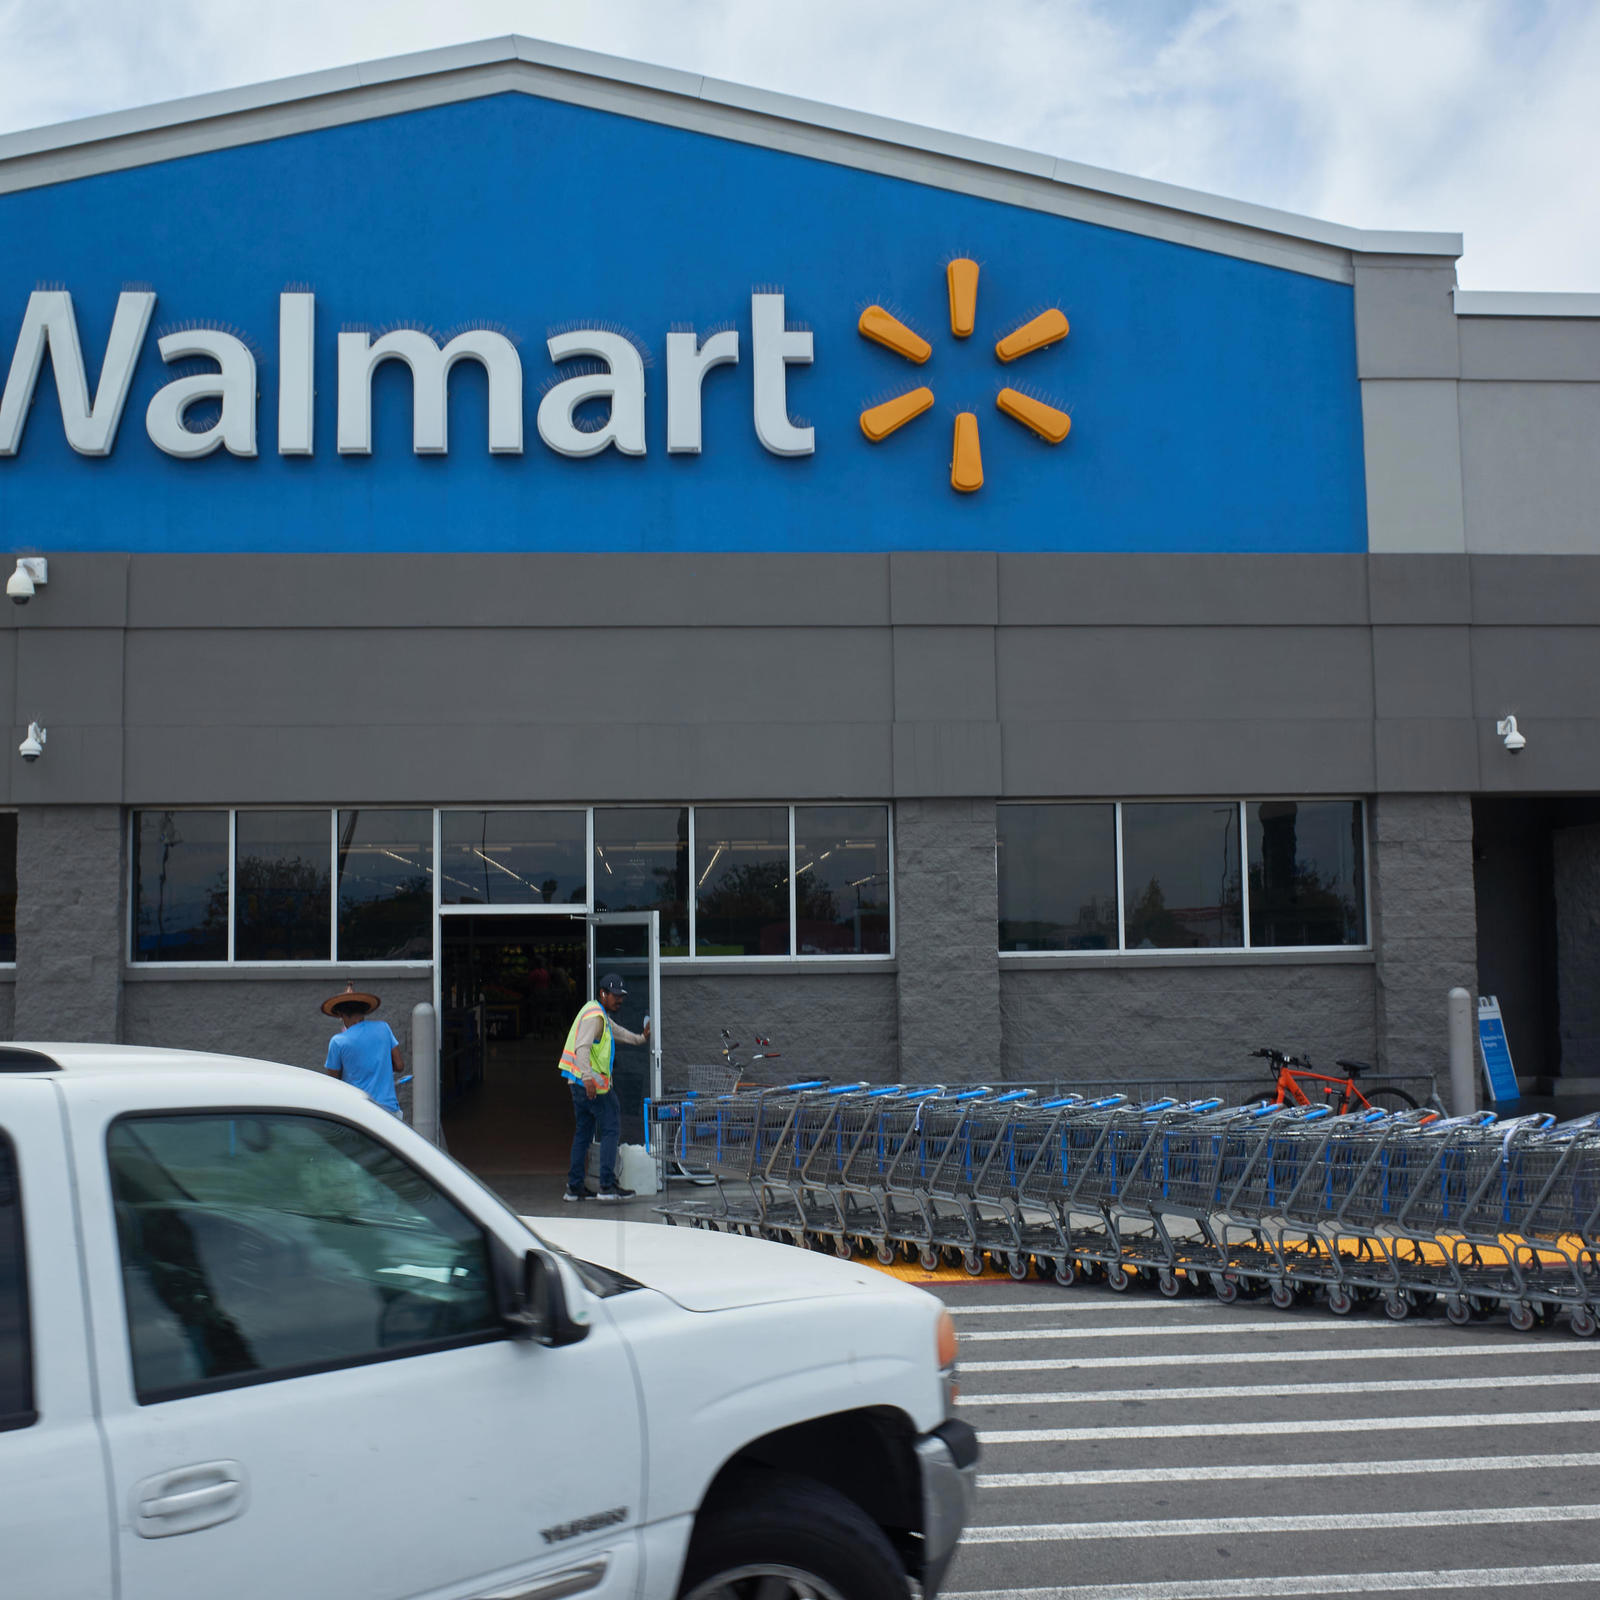 Walmart to upgrade 1,400 stores with $9 billion investment